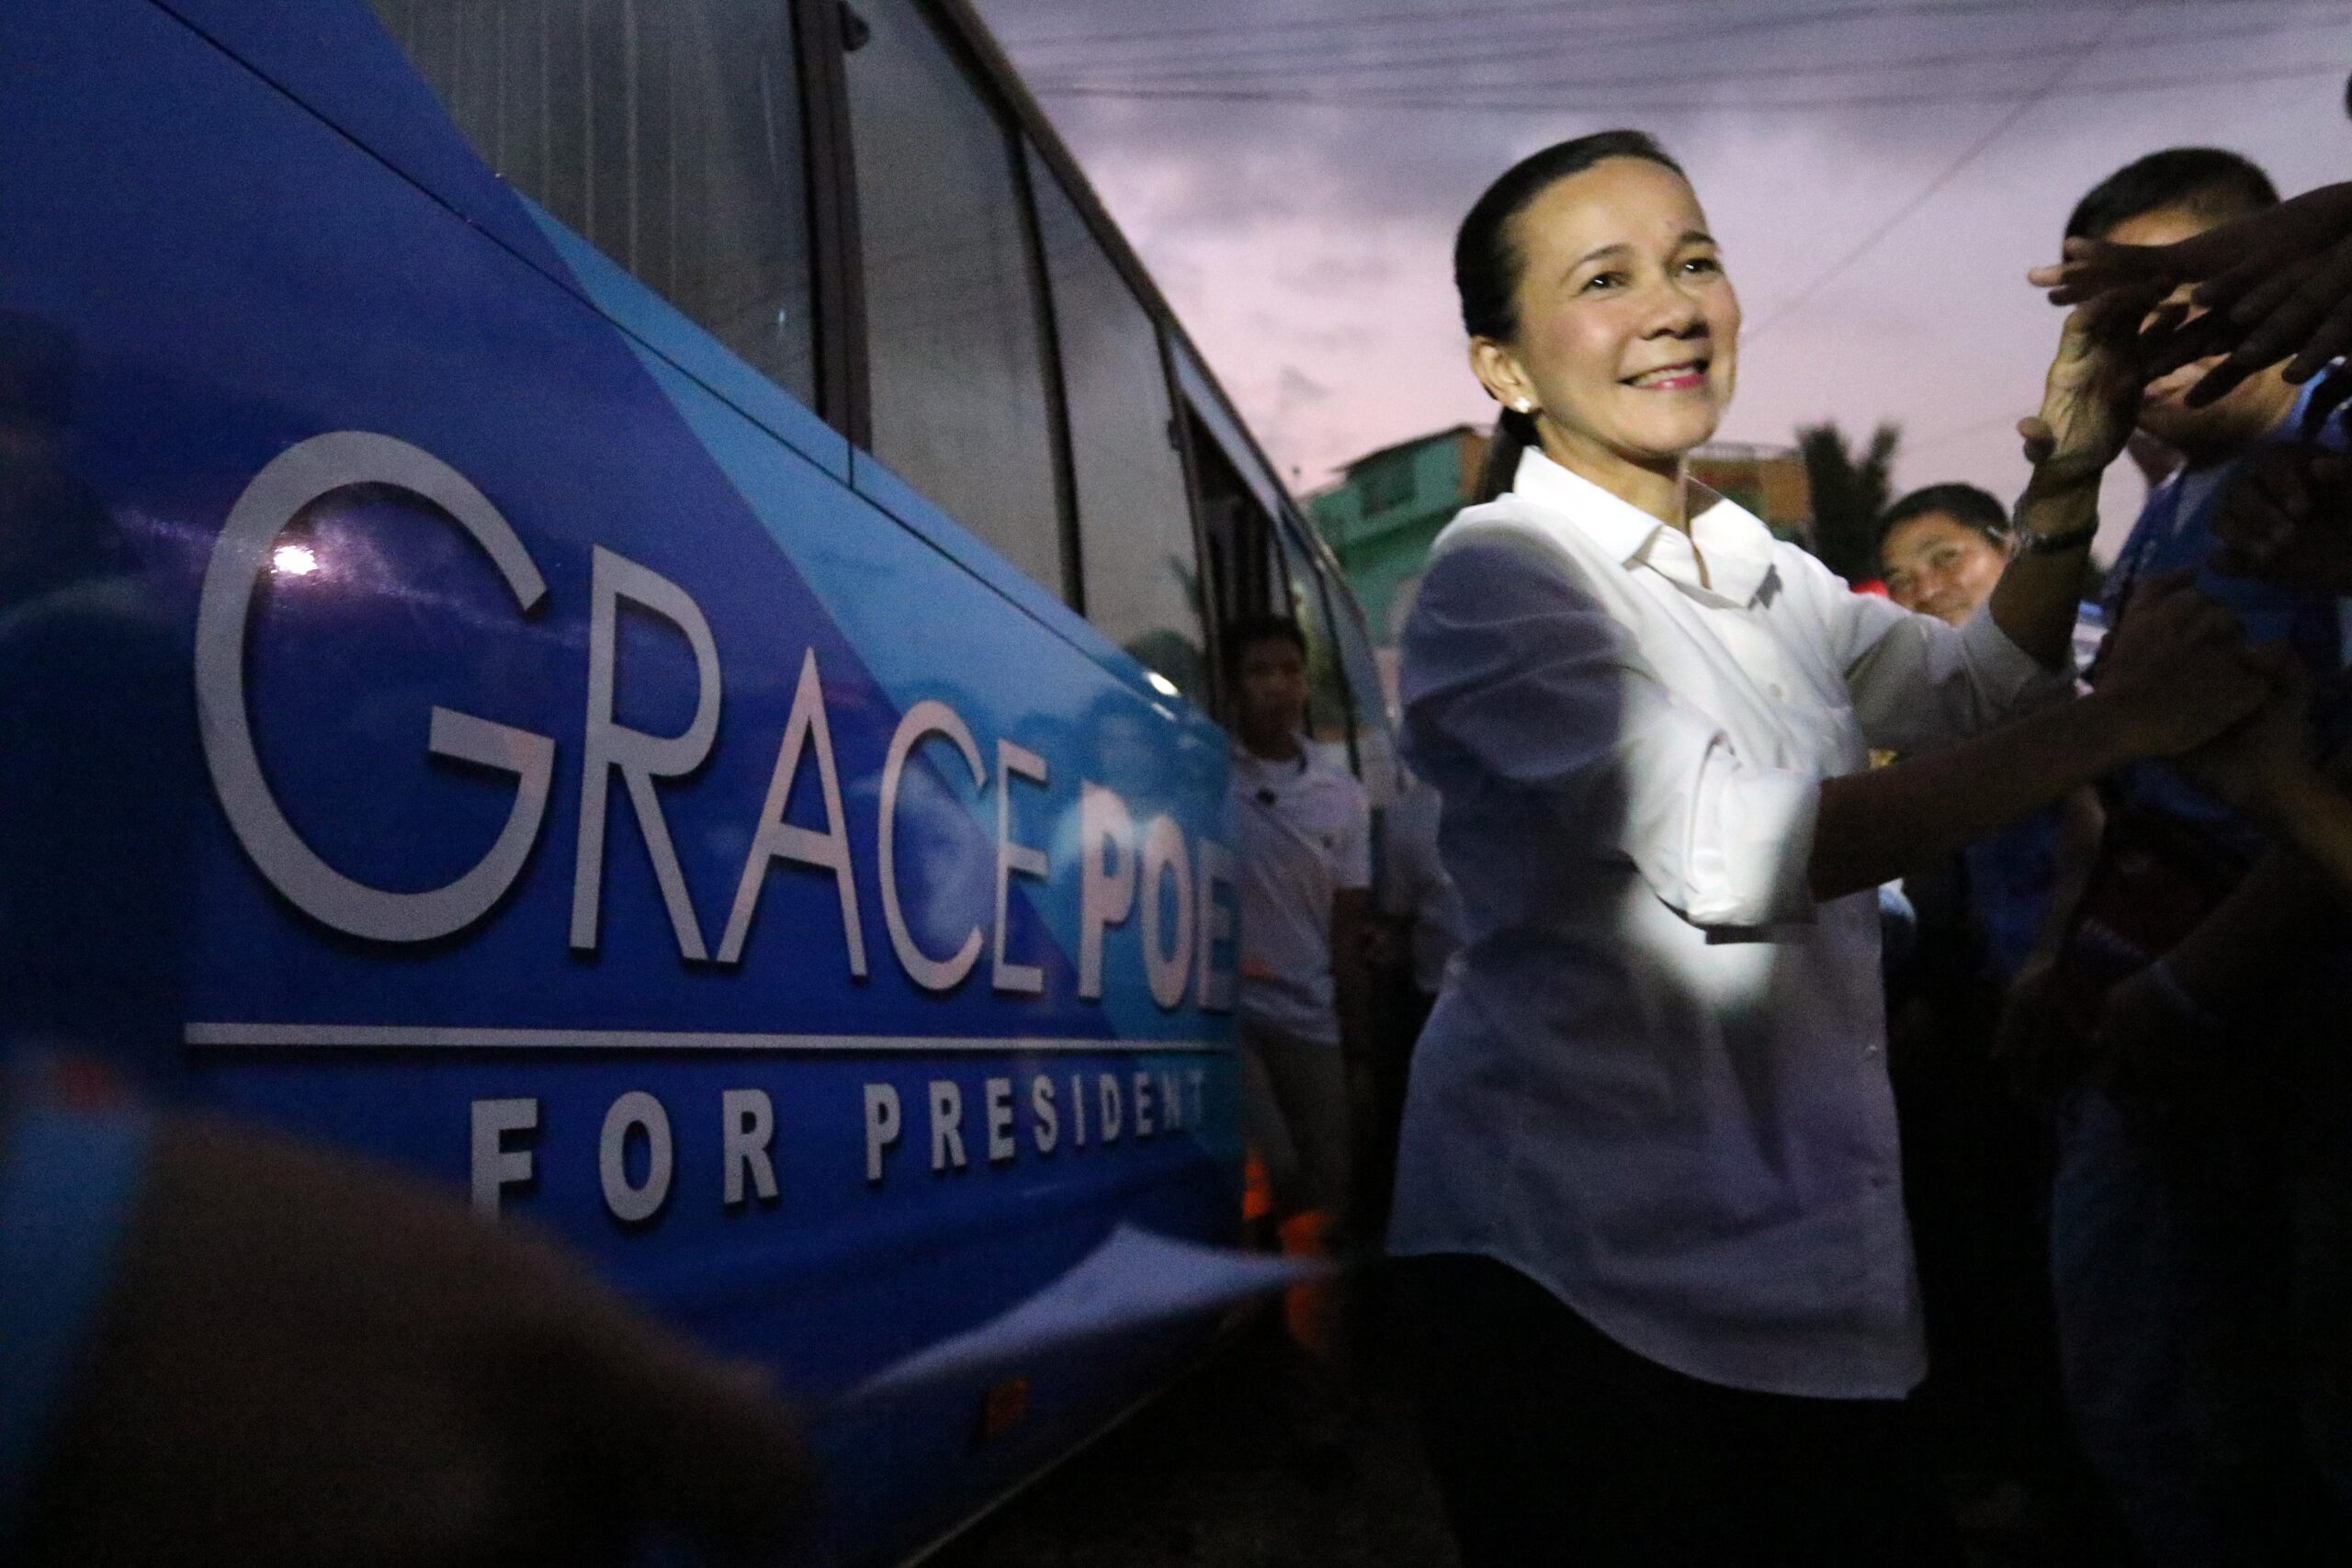 Poe overtakes Binay in SWS poll; Robredo gains most